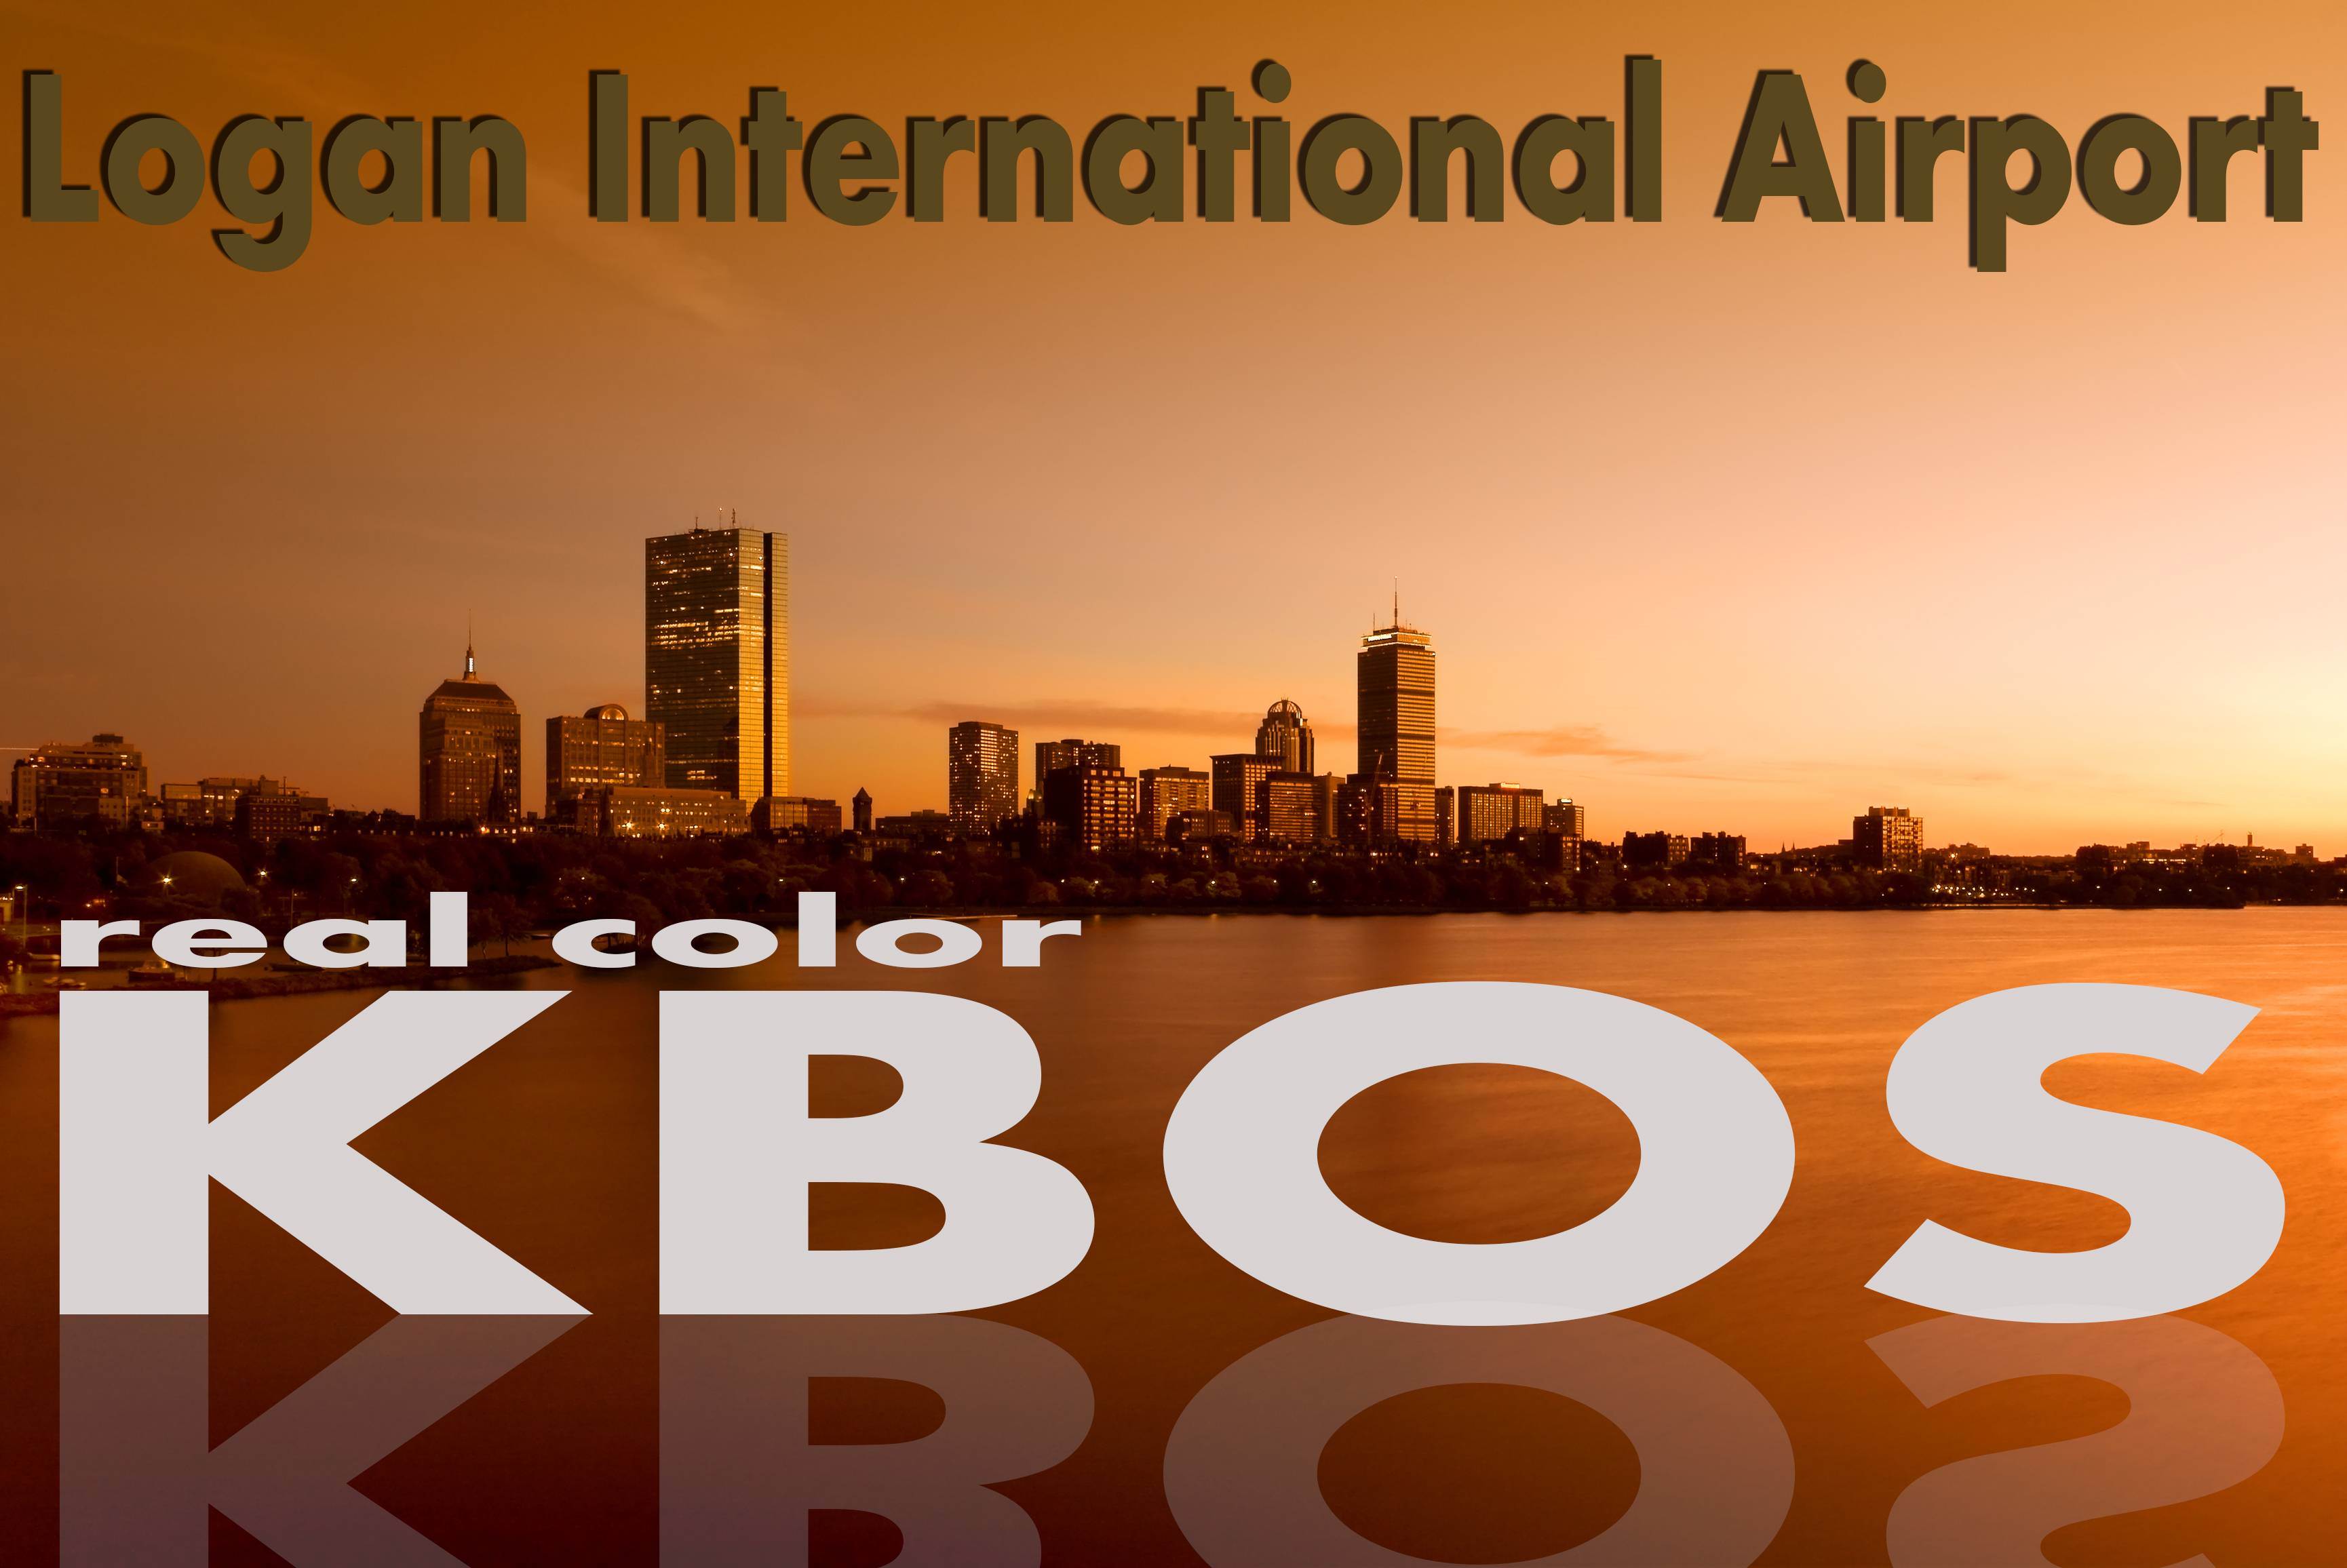 Real Color KBOS for Tower! 2011